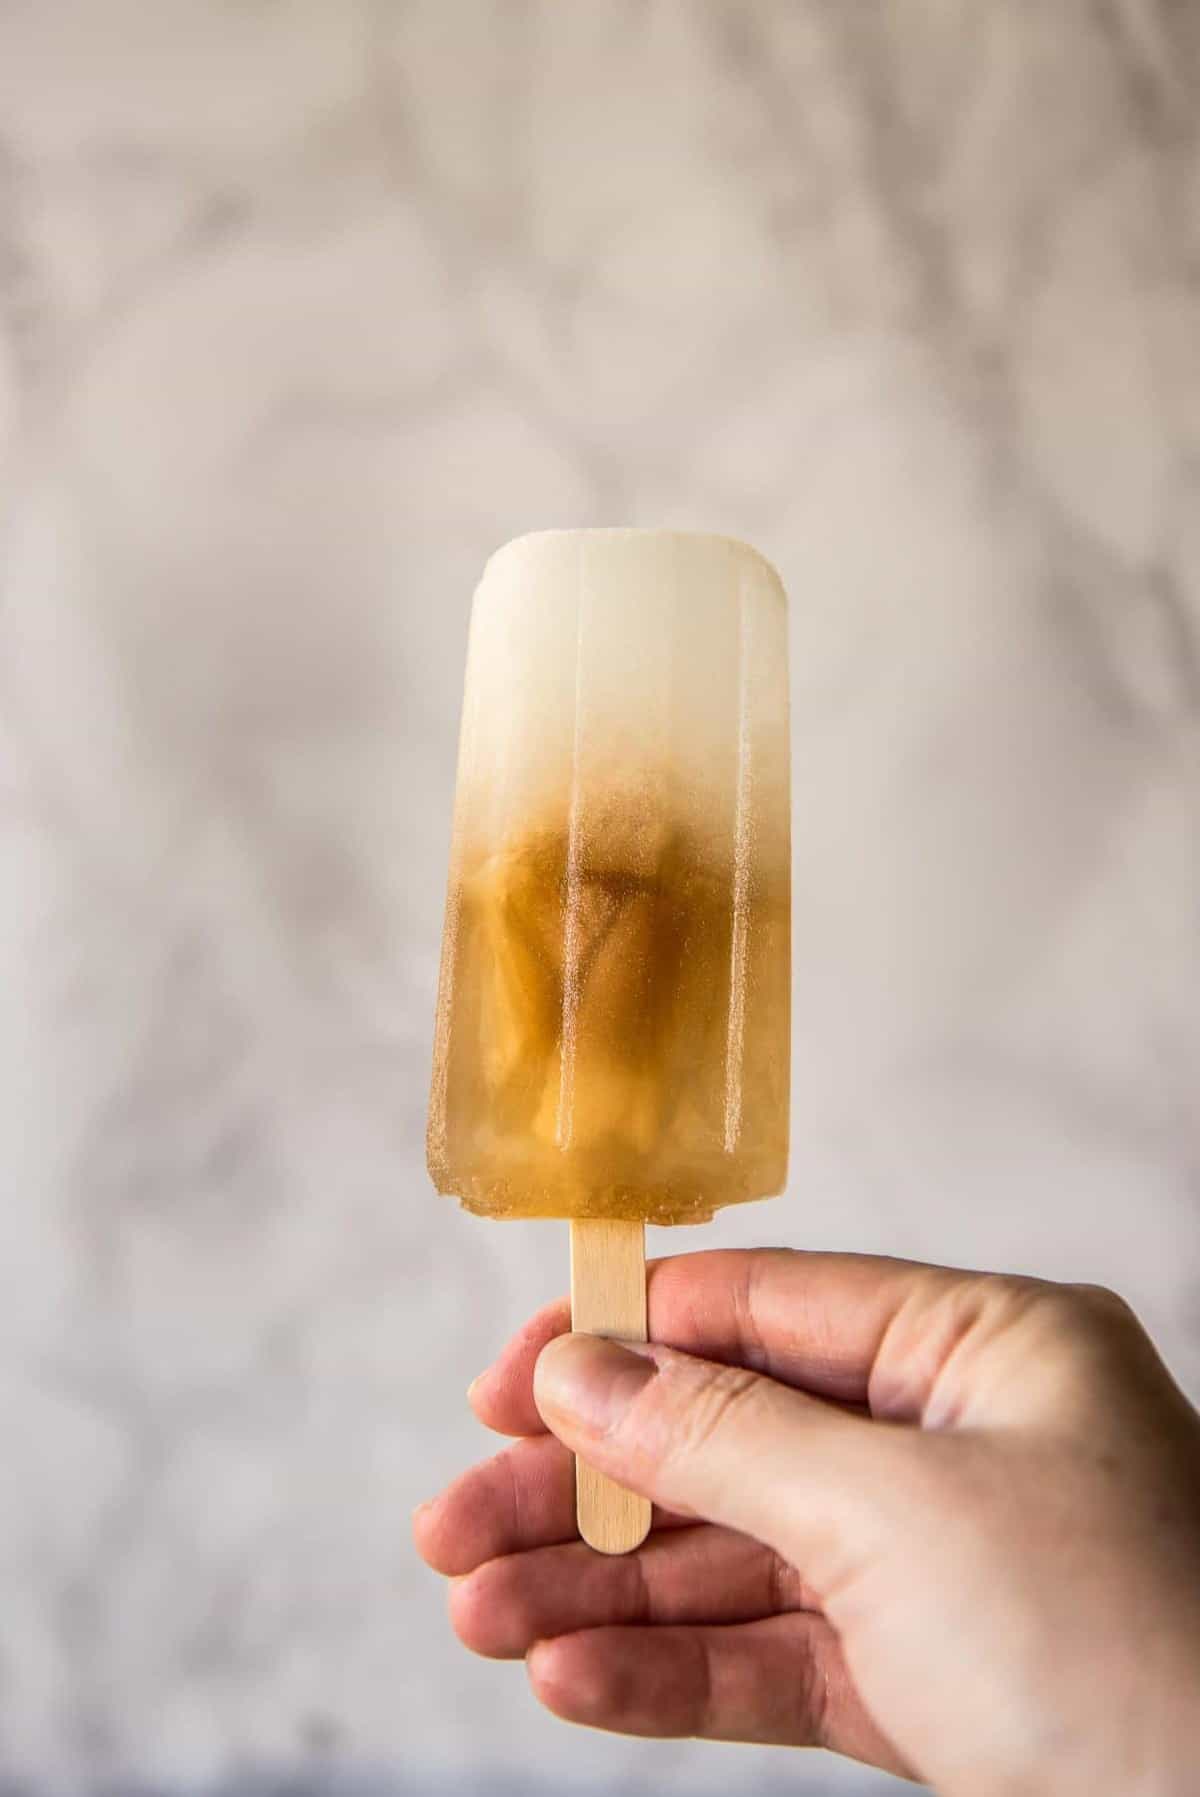 Bold and tangy, these super easy Arnold Palmer Ice Pops will remind you of Italian ice. They're an unbeatable way to cool down on a hot day!